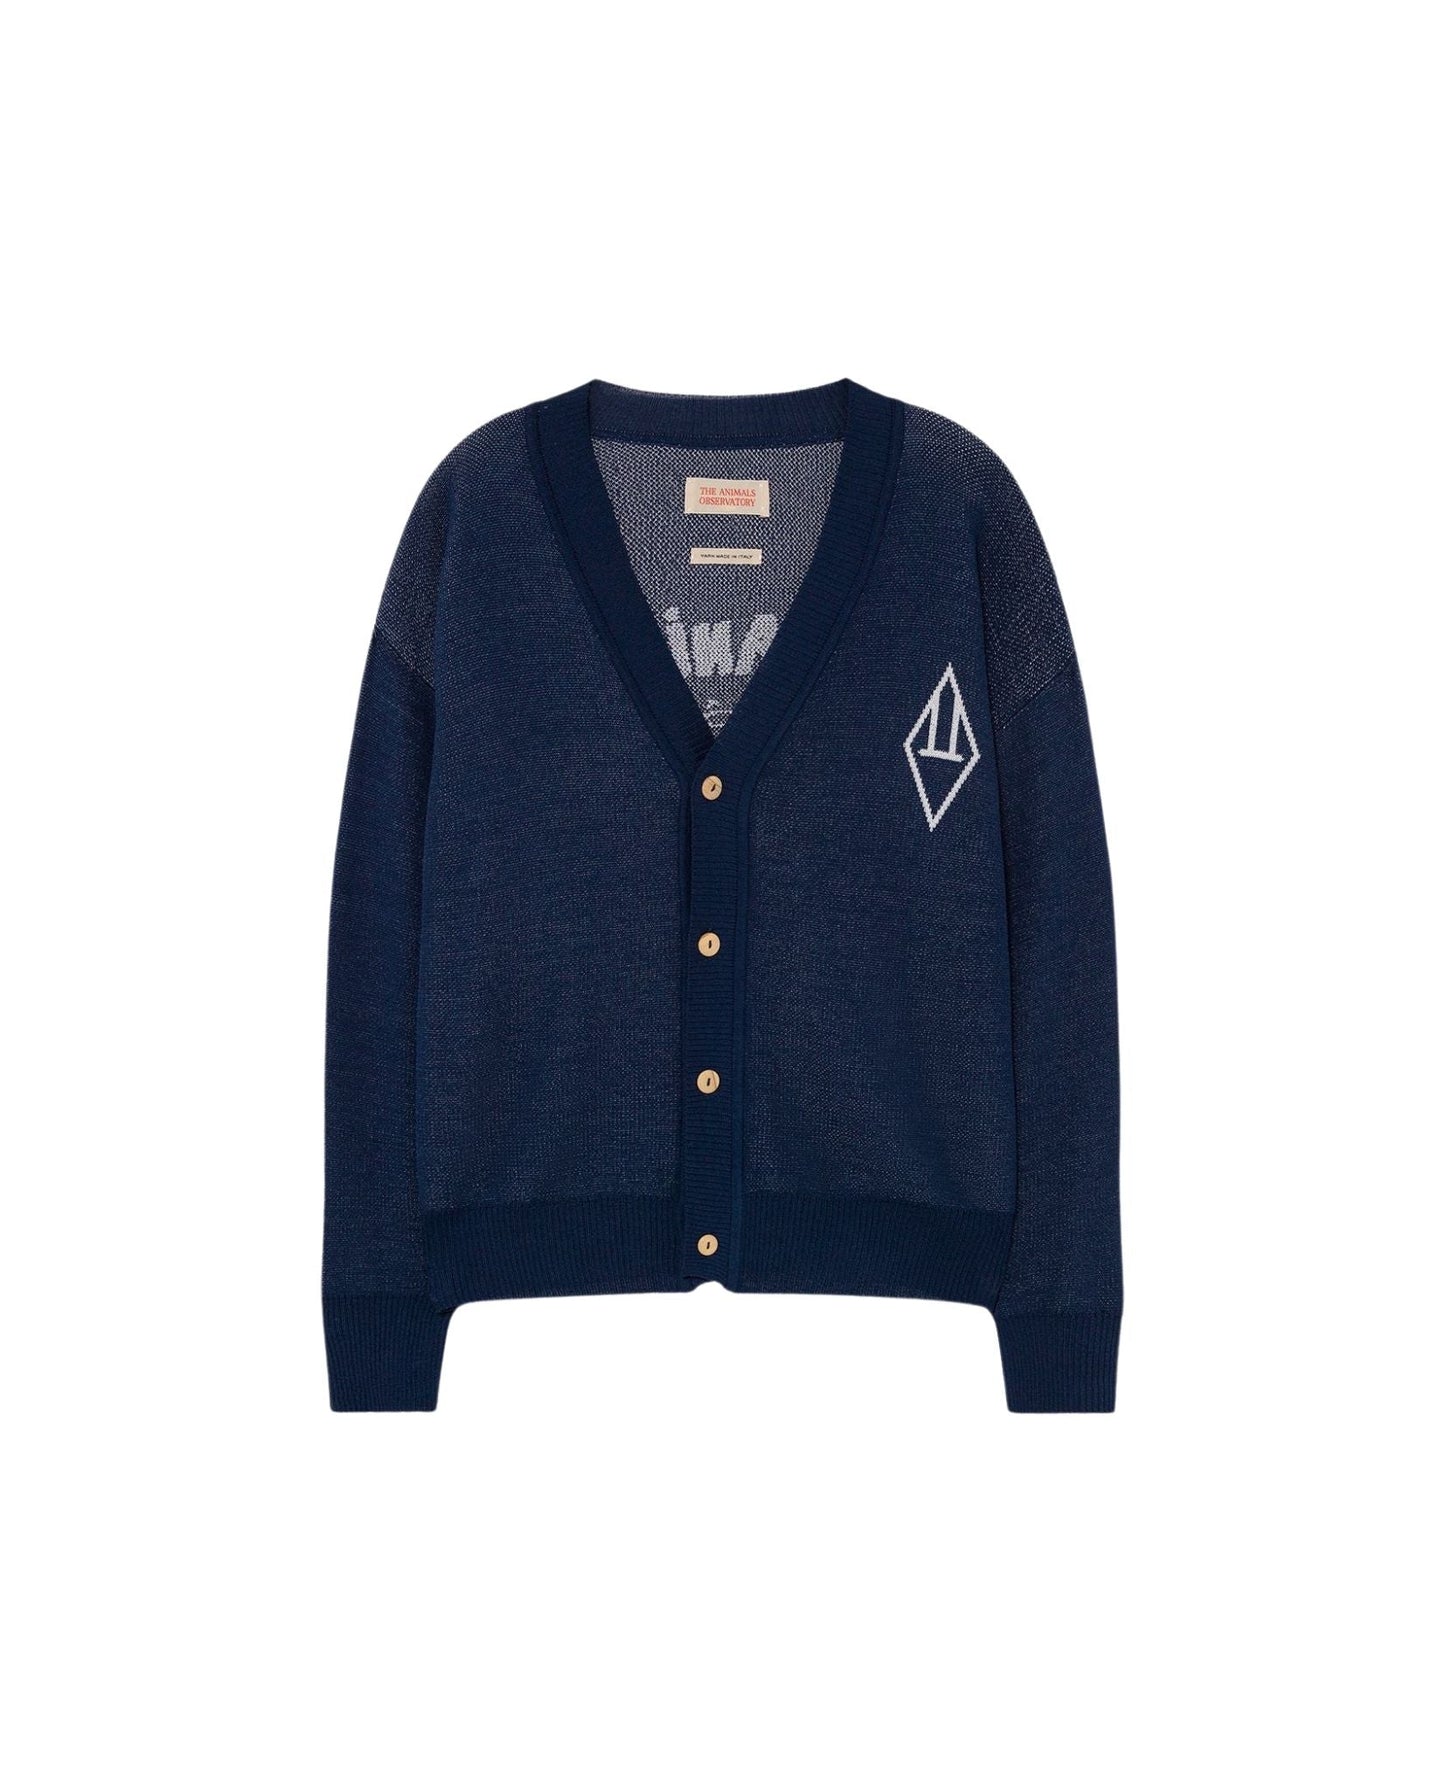 Plain Racoon Cardigan navy Knitwear The Animals Observatory 